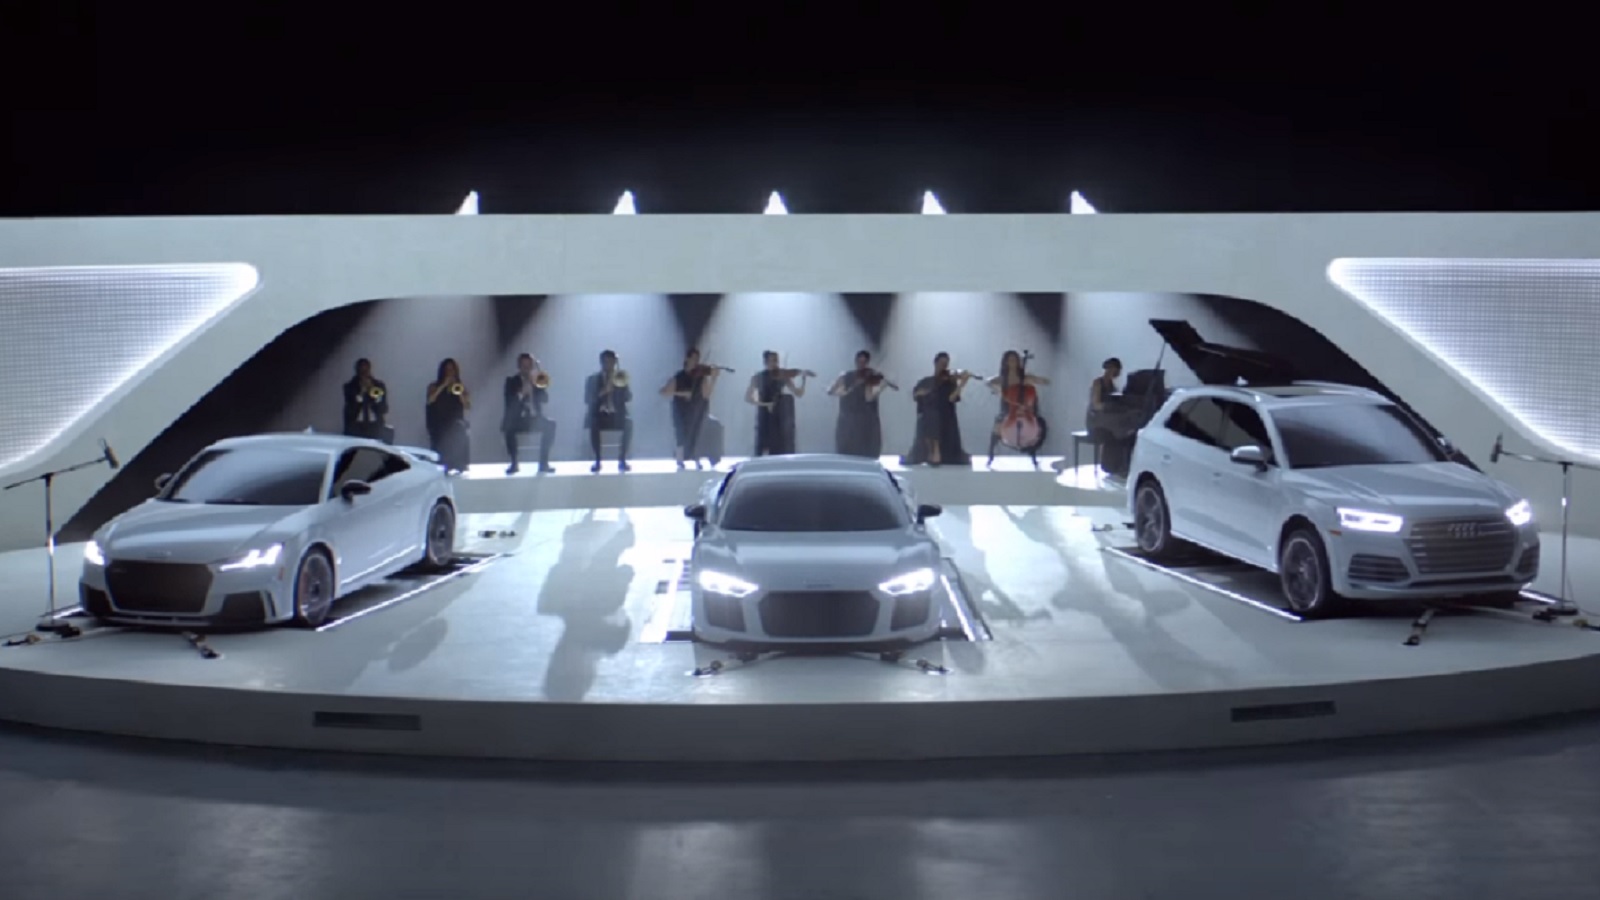 Listen to Audi’s Roaring Tribute Conducted for the Emmy Awards